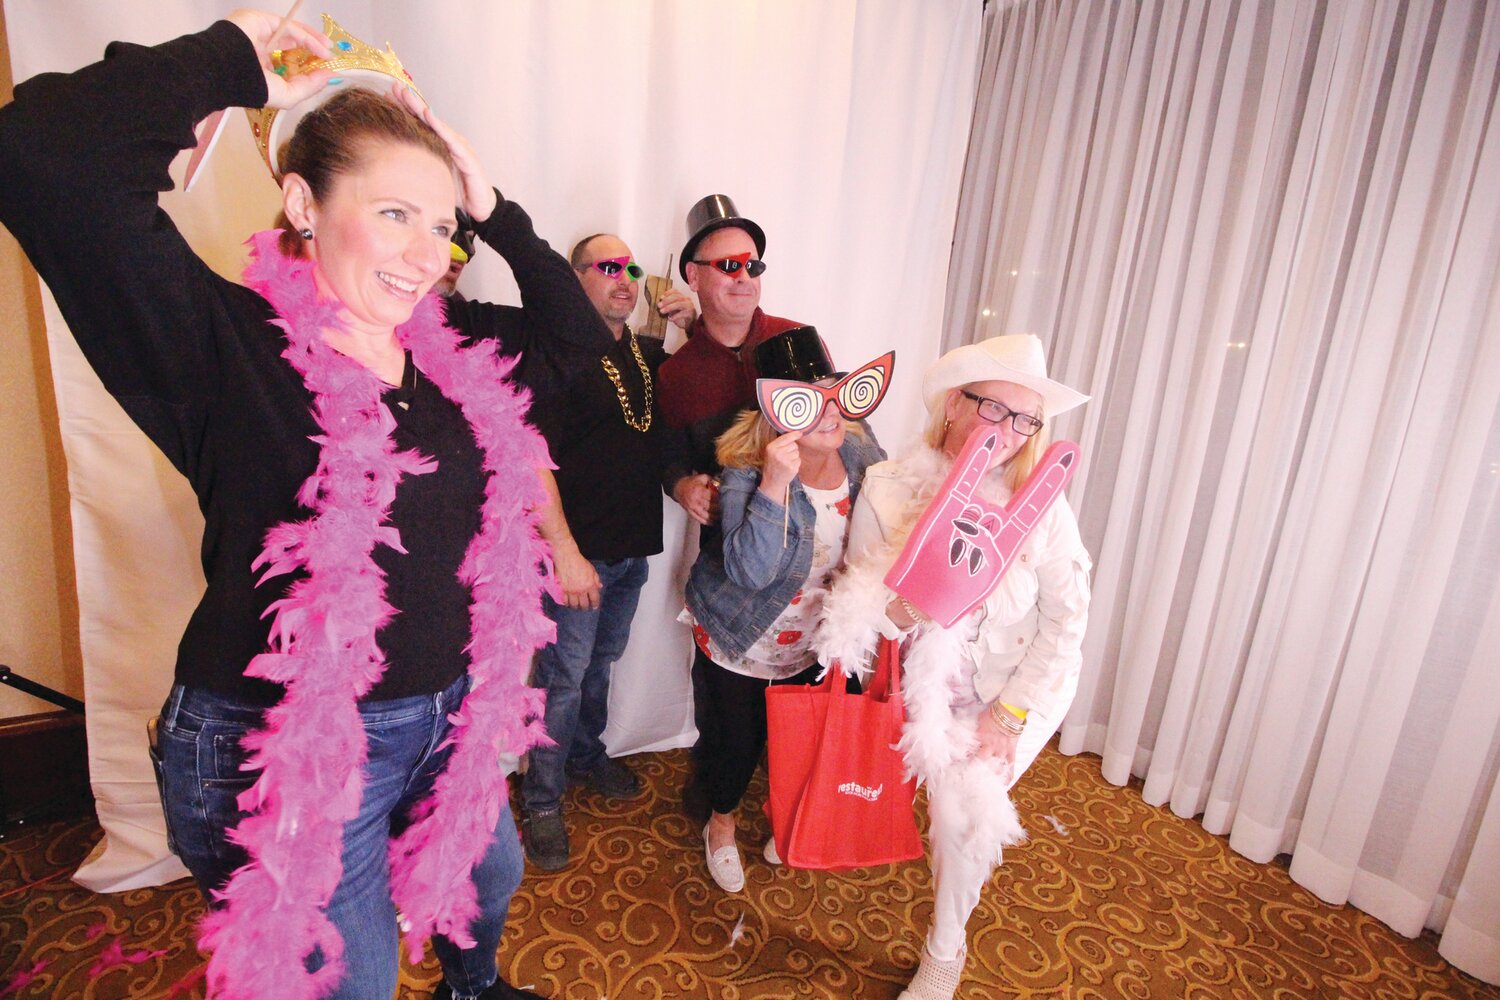 NOW THAT’S A PARTY: Forget the selfies, with a selection of attire visitors had the fun of assuming different roles as they posed at a Gala Photobooth. The company rents out booths for weddings, parties and events.